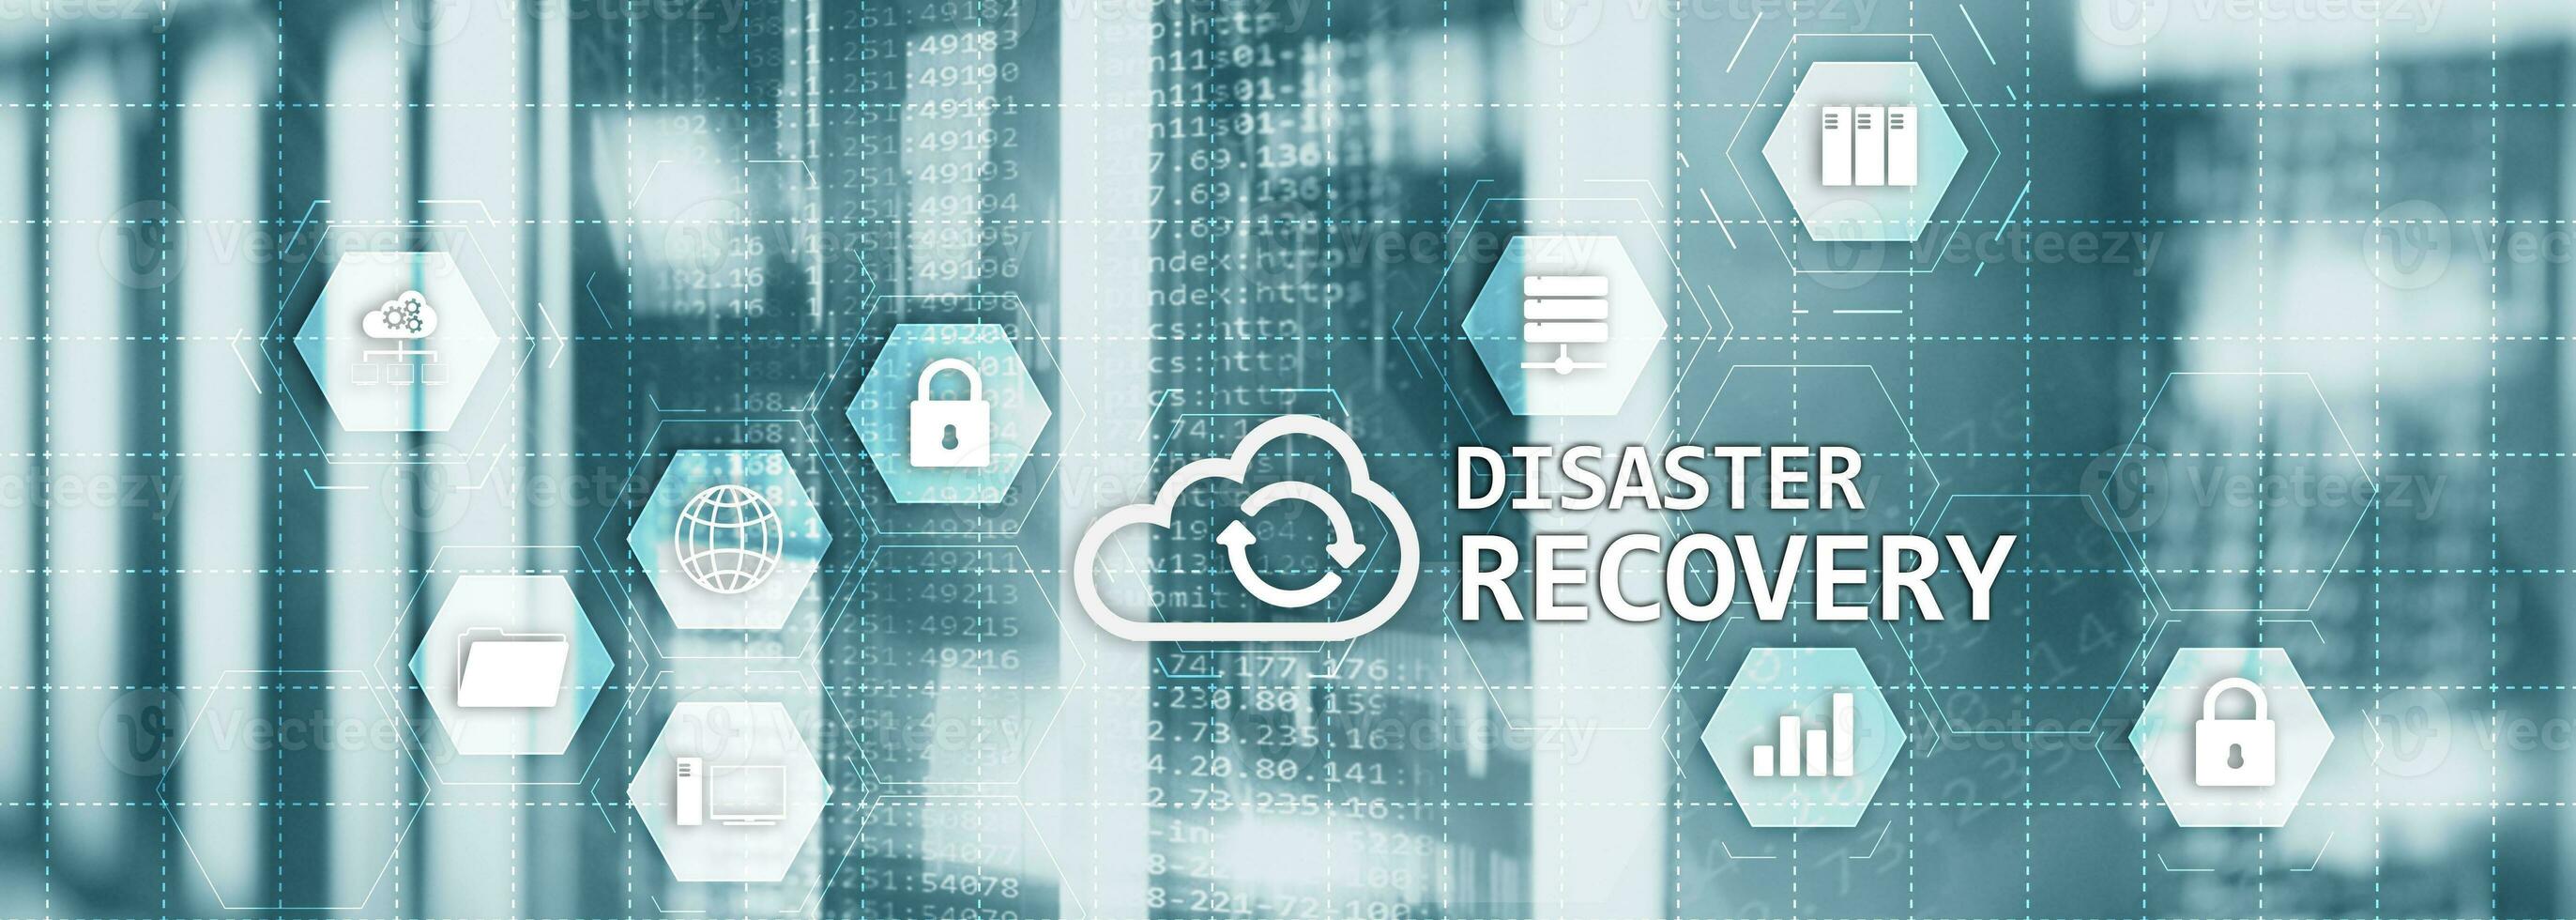 Disaster Recovery Plan for your corporation. Cyber Security concept 2020. photo